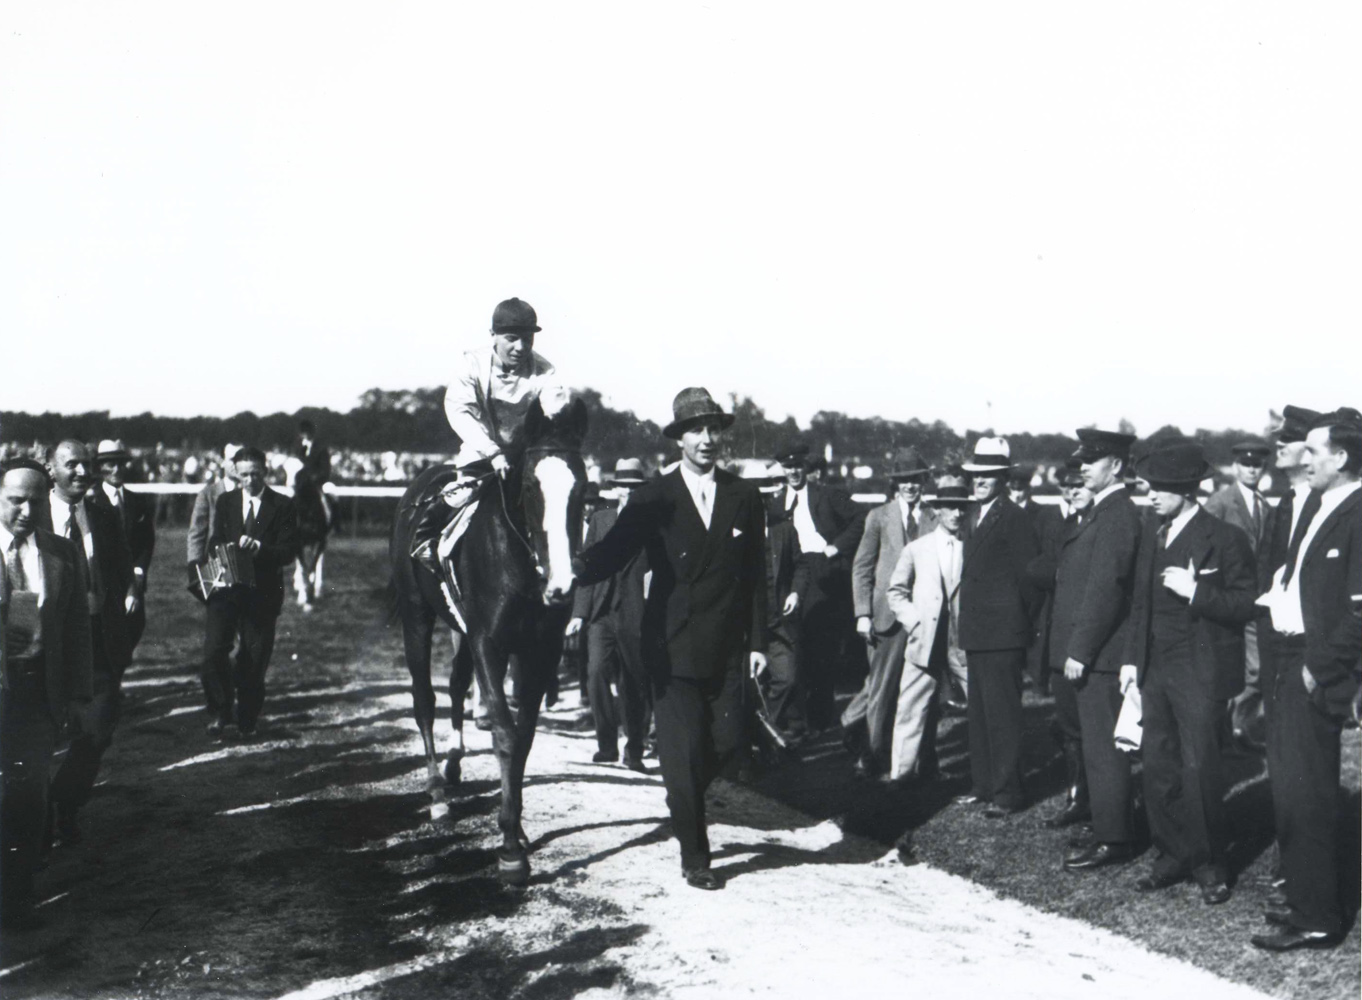 Top Flight (Raymond Workman up) entering the winner's circle with owner C. V. Whitney (Keeneland Library Cook Collection/Museum Collection)